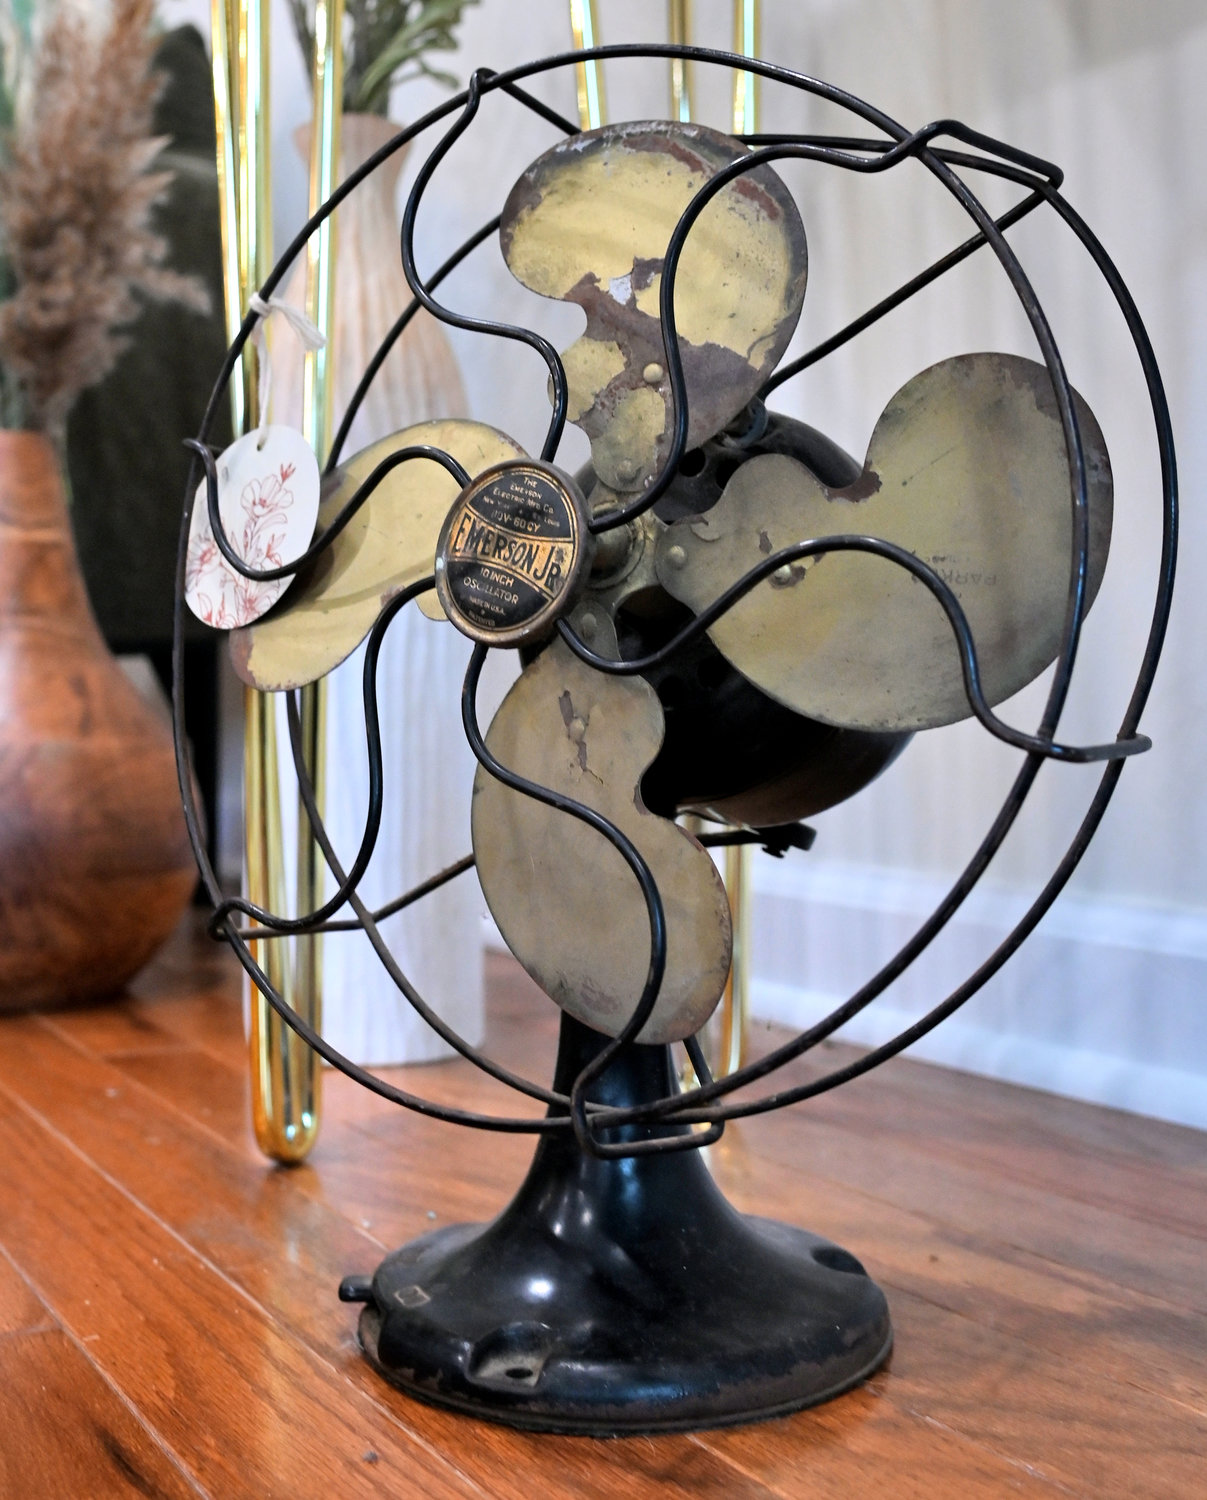 Retro fan on display at Abode on Oxford Road in New Hartford Wed., Feb. 22.